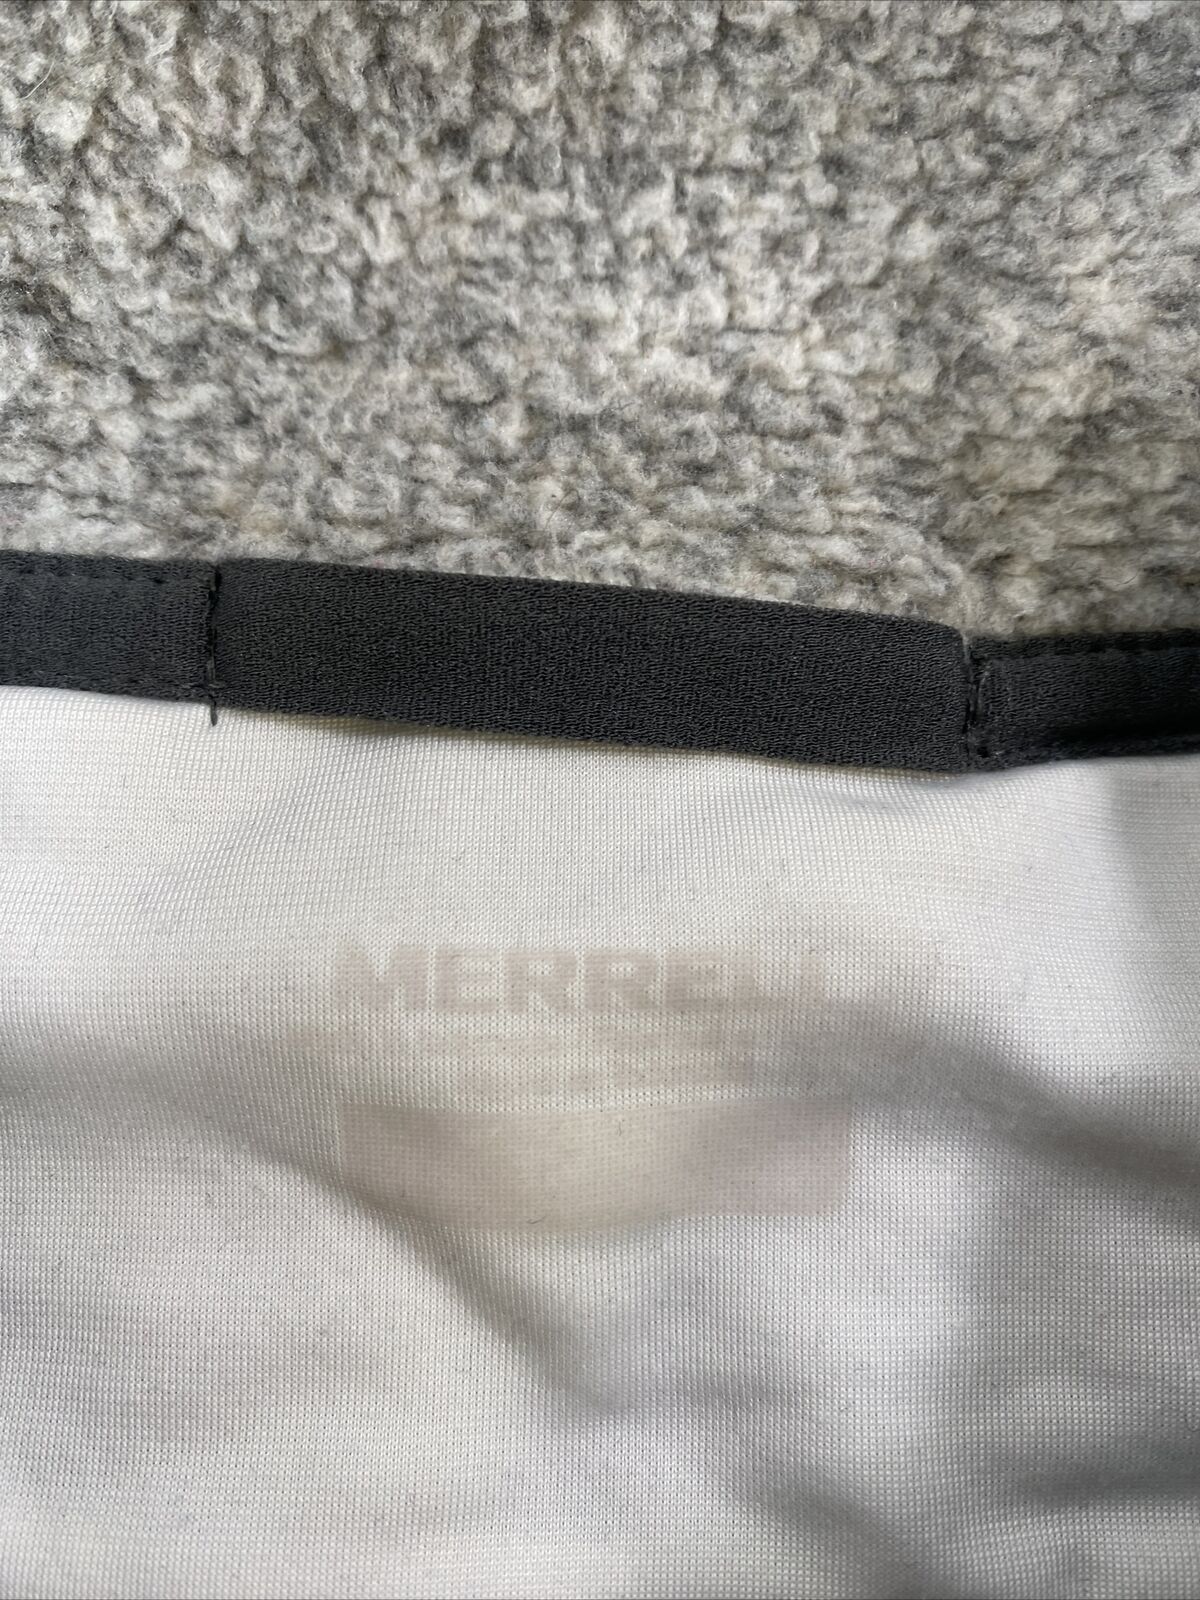 Merrell Women's Gray Midlayers Sweater Weather Pullover Sweater - S